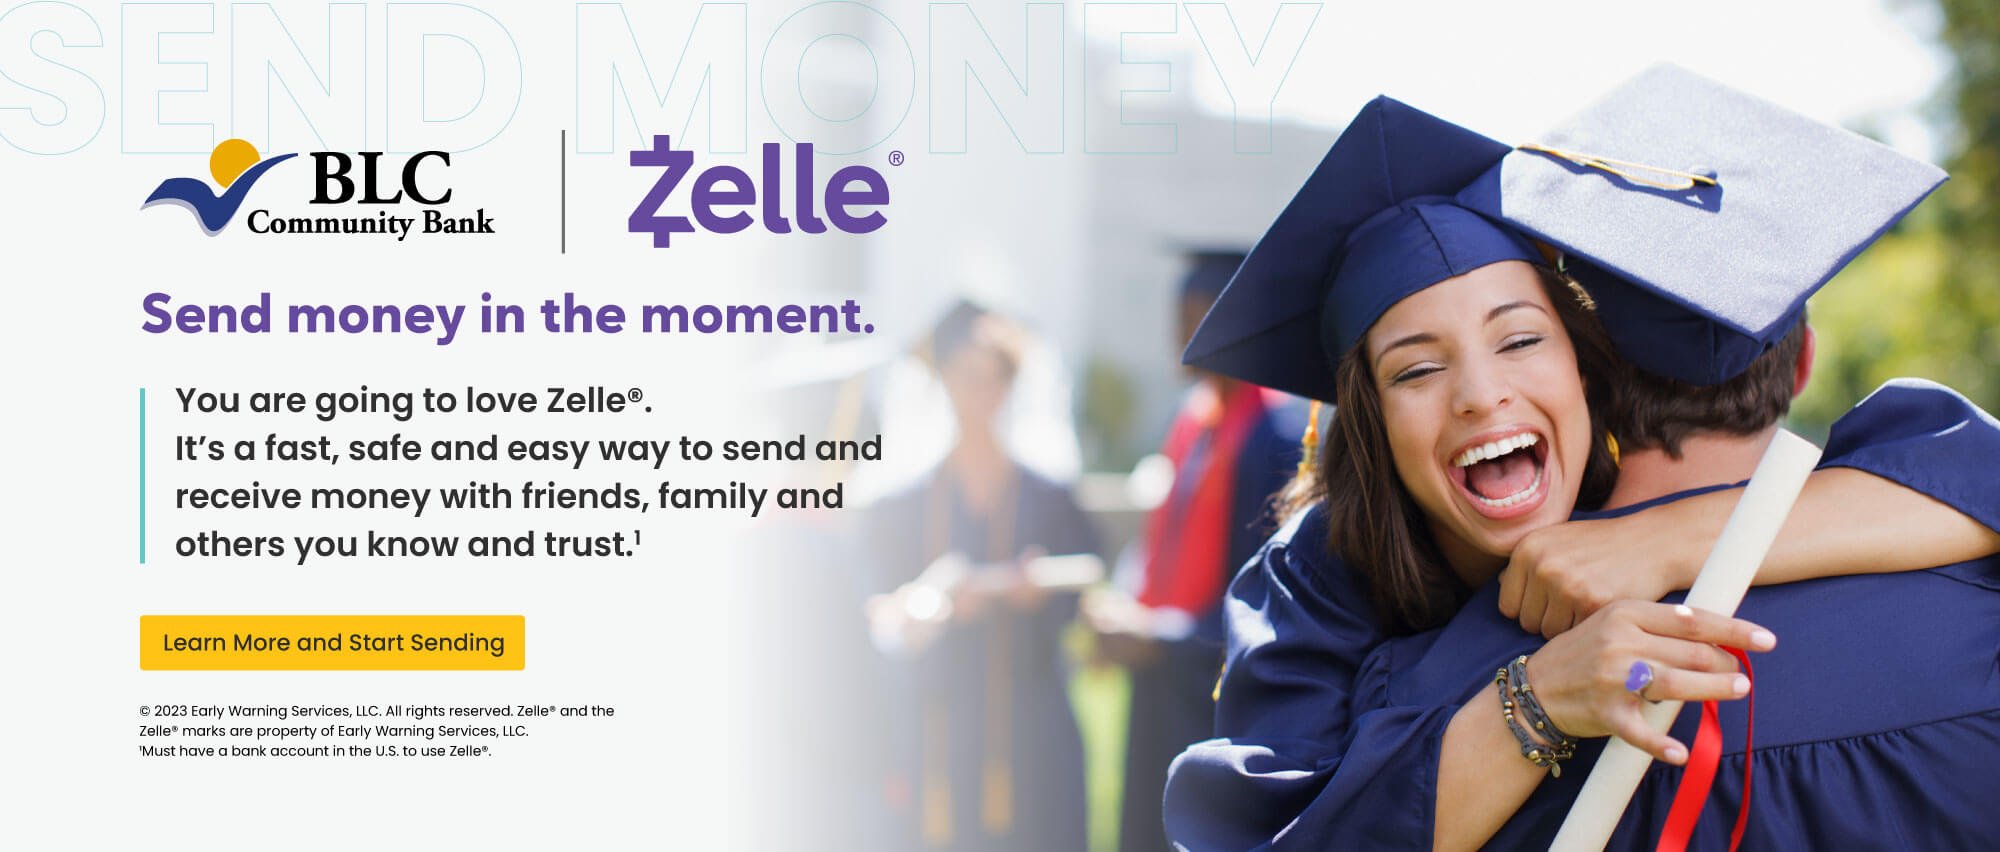 Send money in the moment. You are going to love ZelleÃƒâ€šÃ‚Â®. It's a fast, safe and easy way to send and receive money with friends, family and others you know and trust. Learn more and start sending  ÃƒÆ’Ã†â€™Ãƒâ€ Ã¢â‚¬â„¢ÃƒÆ’Ã¢â‚¬Â ÃƒÂ¢Ã¢â€šÂ¬Ã¢â€žÂ¢ÃƒÆ’Ã†â€™ÃƒÂ¢Ã¢â€šÂ¬Ã‚Â ÃƒÆ’Ã‚Â¢ÃƒÂ¢Ã¢â‚¬Å¡Ã‚Â¬ÃƒÂ¢Ã¢â‚¬Å¾Ã‚Â¢ÃƒÆ’Ã†â€™Ãƒâ€ Ã¢â‚¬â„¢ÃƒÆ’Ã¢â‚¬Å¡Ãƒâ€šÃ‚Â¢ÃƒÆ’Ã†â€™Ãƒâ€šÃ‚Â¢ÃƒÆ’Ã‚Â¢ÃƒÂ¢Ã¢â‚¬Å¡Ã‚Â¬Ãƒâ€¦Ã‚Â¡ÃƒÆ’Ã¢â‚¬Å¡Ãƒâ€šÃ‚Â¬ÃƒÆ’Ã†â€™ÃƒÂ¢Ã¢â€šÂ¬Ã‚Â¦ÃƒÆ’Ã¢â‚¬Å¡Ãƒâ€šÃ‚Â¡ÃƒÆ’Ã†â€™Ãƒâ€ Ã¢â‚¬â„¢ÃƒÆ’Ã¢â‚¬Â ÃƒÂ¢Ã¢â€šÂ¬Ã¢â€žÂ¢ÃƒÆ’Ã†â€™Ãƒâ€šÃ‚Â¢ÃƒÆ’Ã‚Â¢ÃƒÂ¢Ã¢â€šÂ¬Ã…Â¡Ãƒâ€šÃ‚Â¬ÃƒÆ’Ã¢â‚¬Â¦Ãƒâ€šÃ‚Â¡ÃƒÆ’Ã†â€™Ãƒâ€ Ã¢â‚¬â„¢ÃƒÆ’Ã‚Â¢ÃƒÂ¢Ã¢â‚¬Å¡Ã‚Â¬Ãƒâ€¦Ã‚Â¡ÃƒÆ’Ã†â€™ÃƒÂ¢Ã¢â€šÂ¬Ã…Â¡ÃƒÆ’Ã¢â‚¬Å¡Ãƒâ€šÃ‚Â©2023 early warning services, llc. all rights reserved, zelle and the zelle marks are property of early warning services, llc. 1 must have a bank account in the U.S. to use zelle.